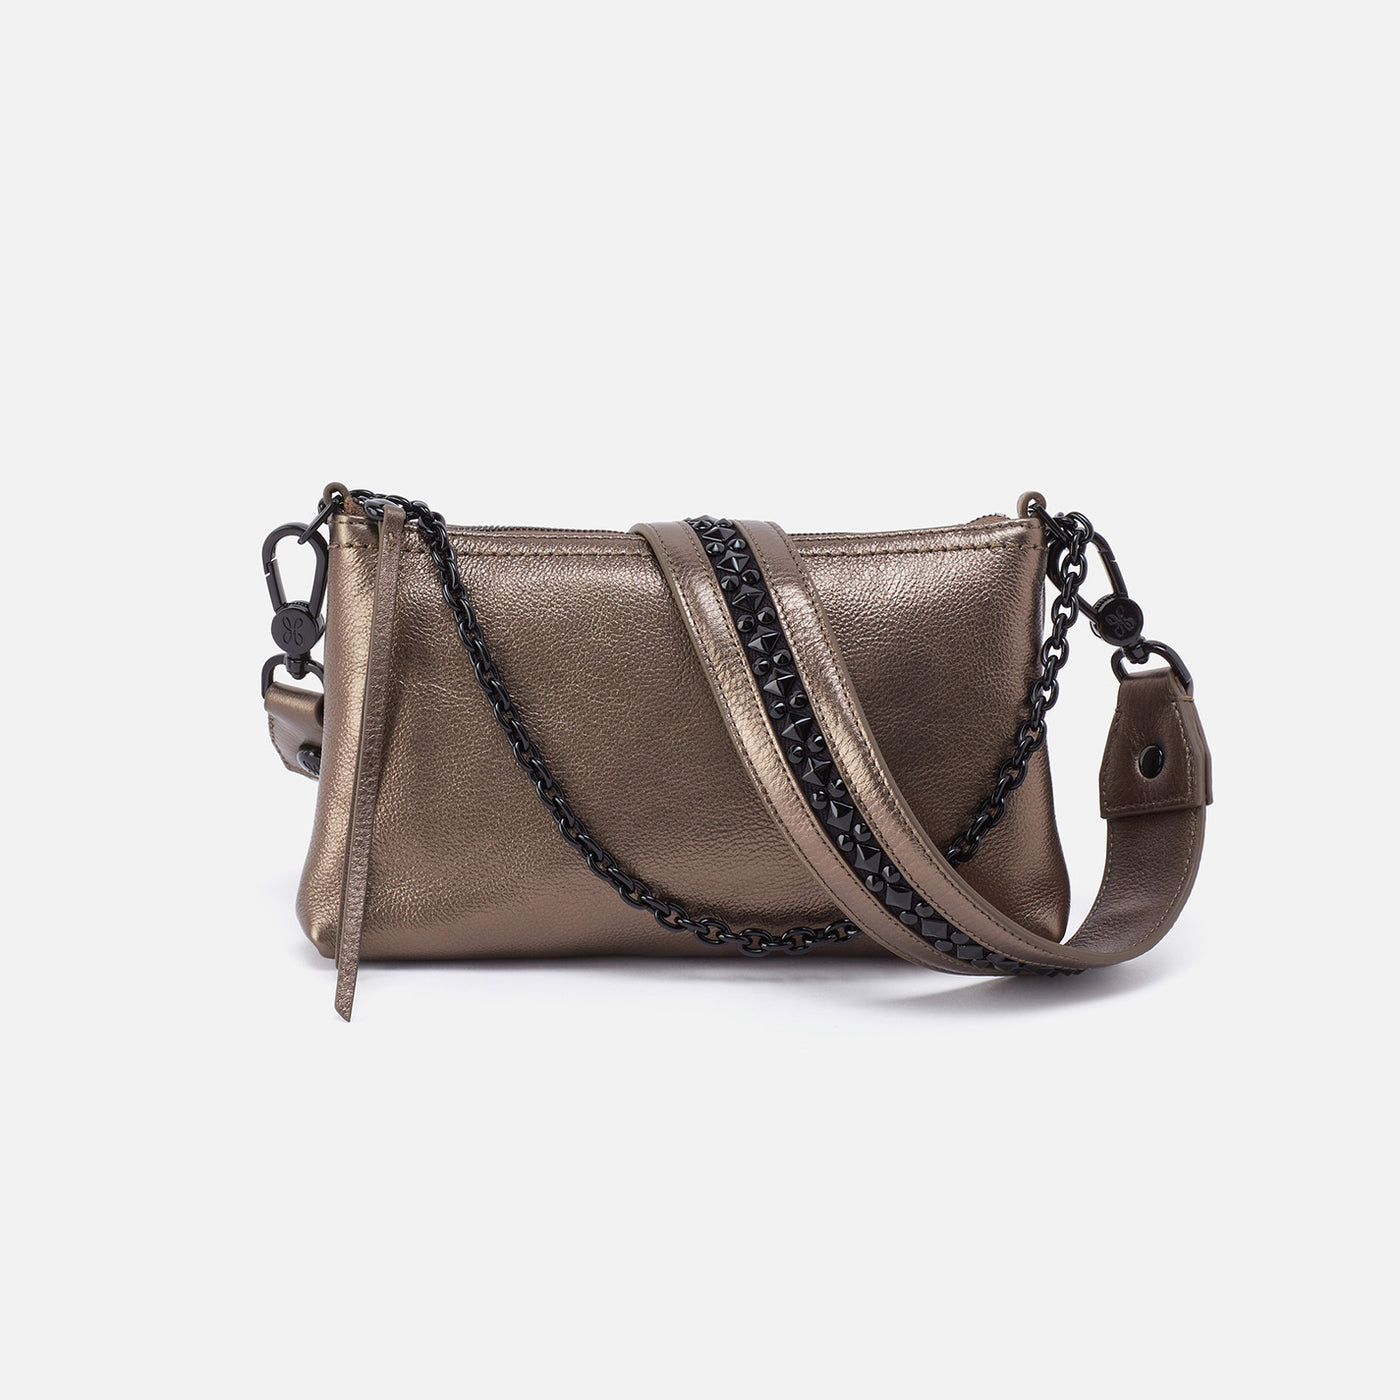 Darcy Luxe Crossbody in Pebbled Metallic Leather - Pewter